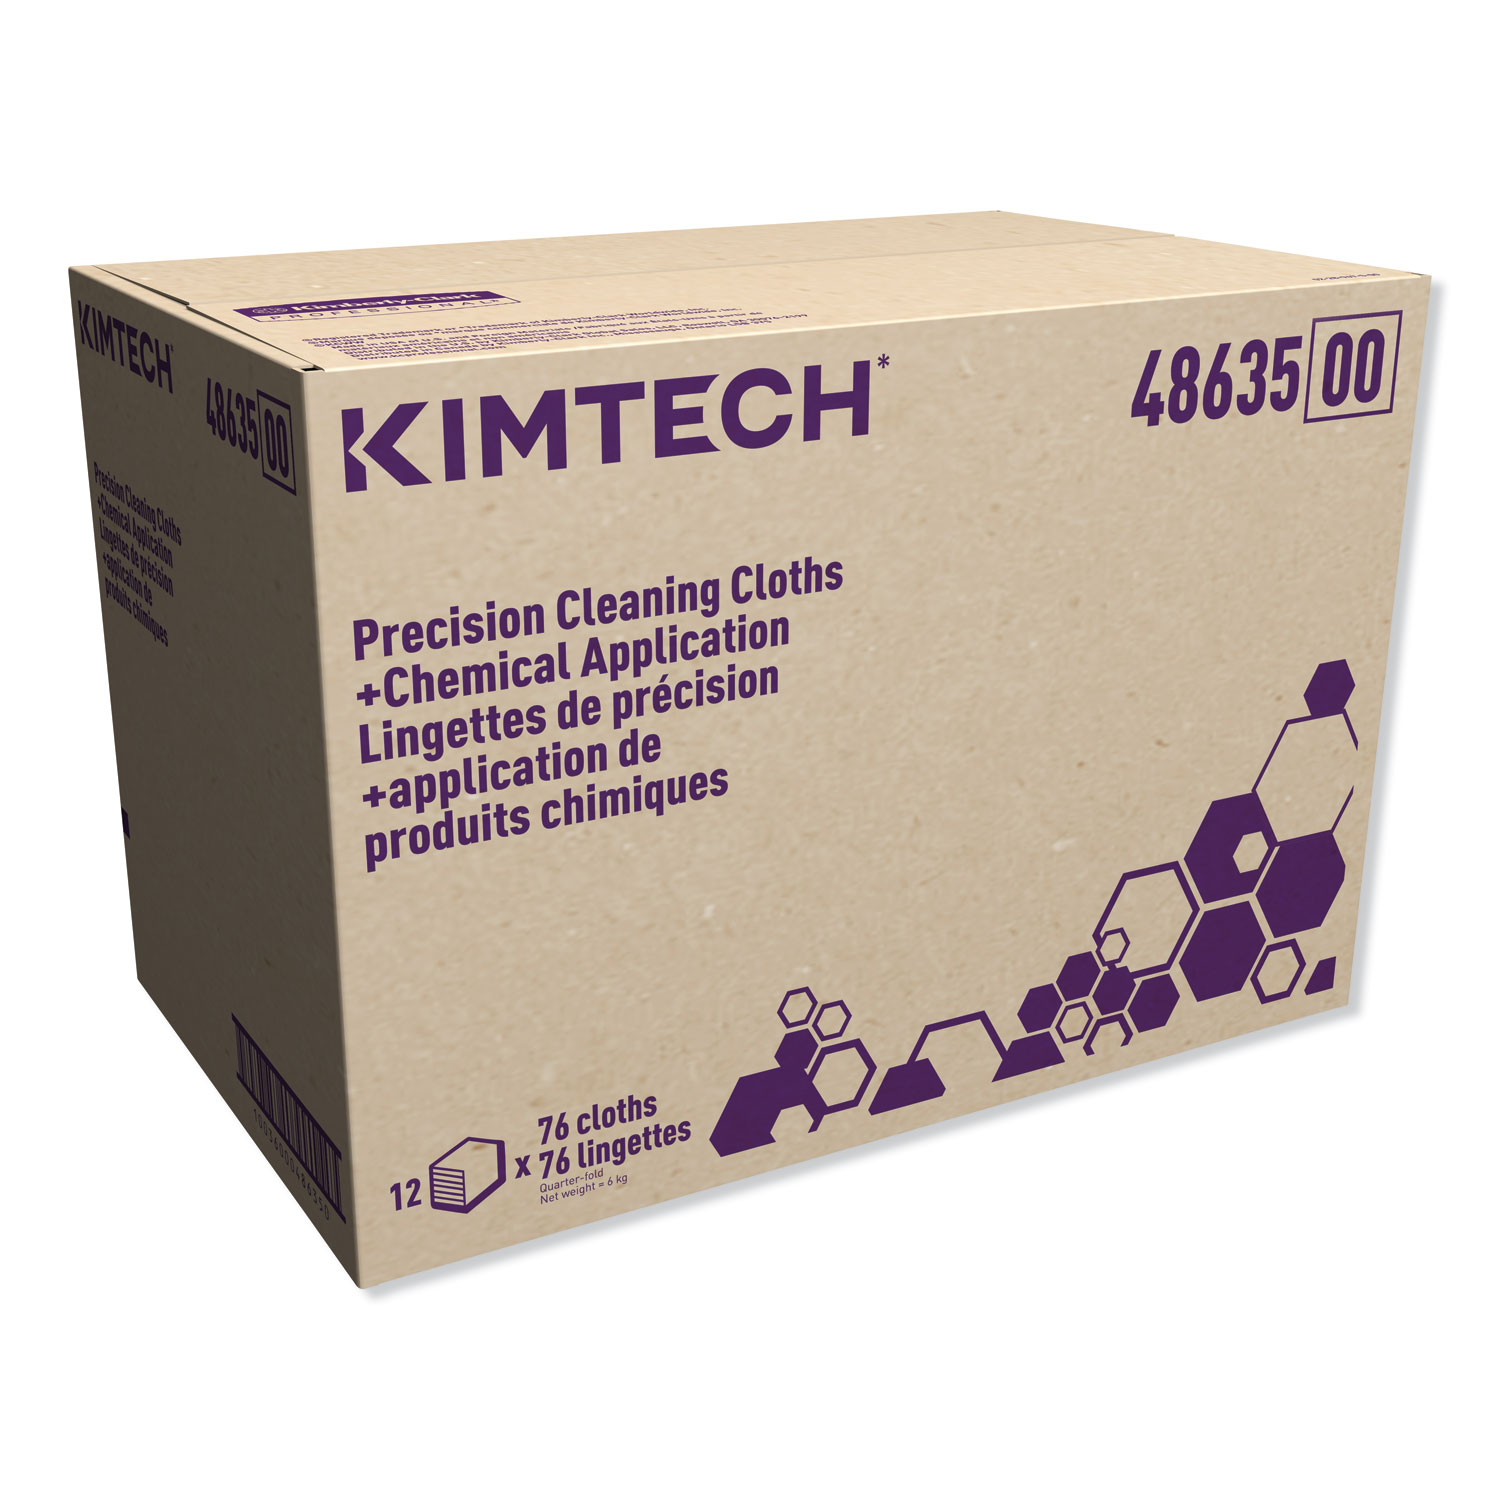  Kimtech 48635 Critical Cleaning Cloth, 1-Ply, 12.5 x 12, White, 76/Pack, 12 Packs/Carton (KCC48635) 